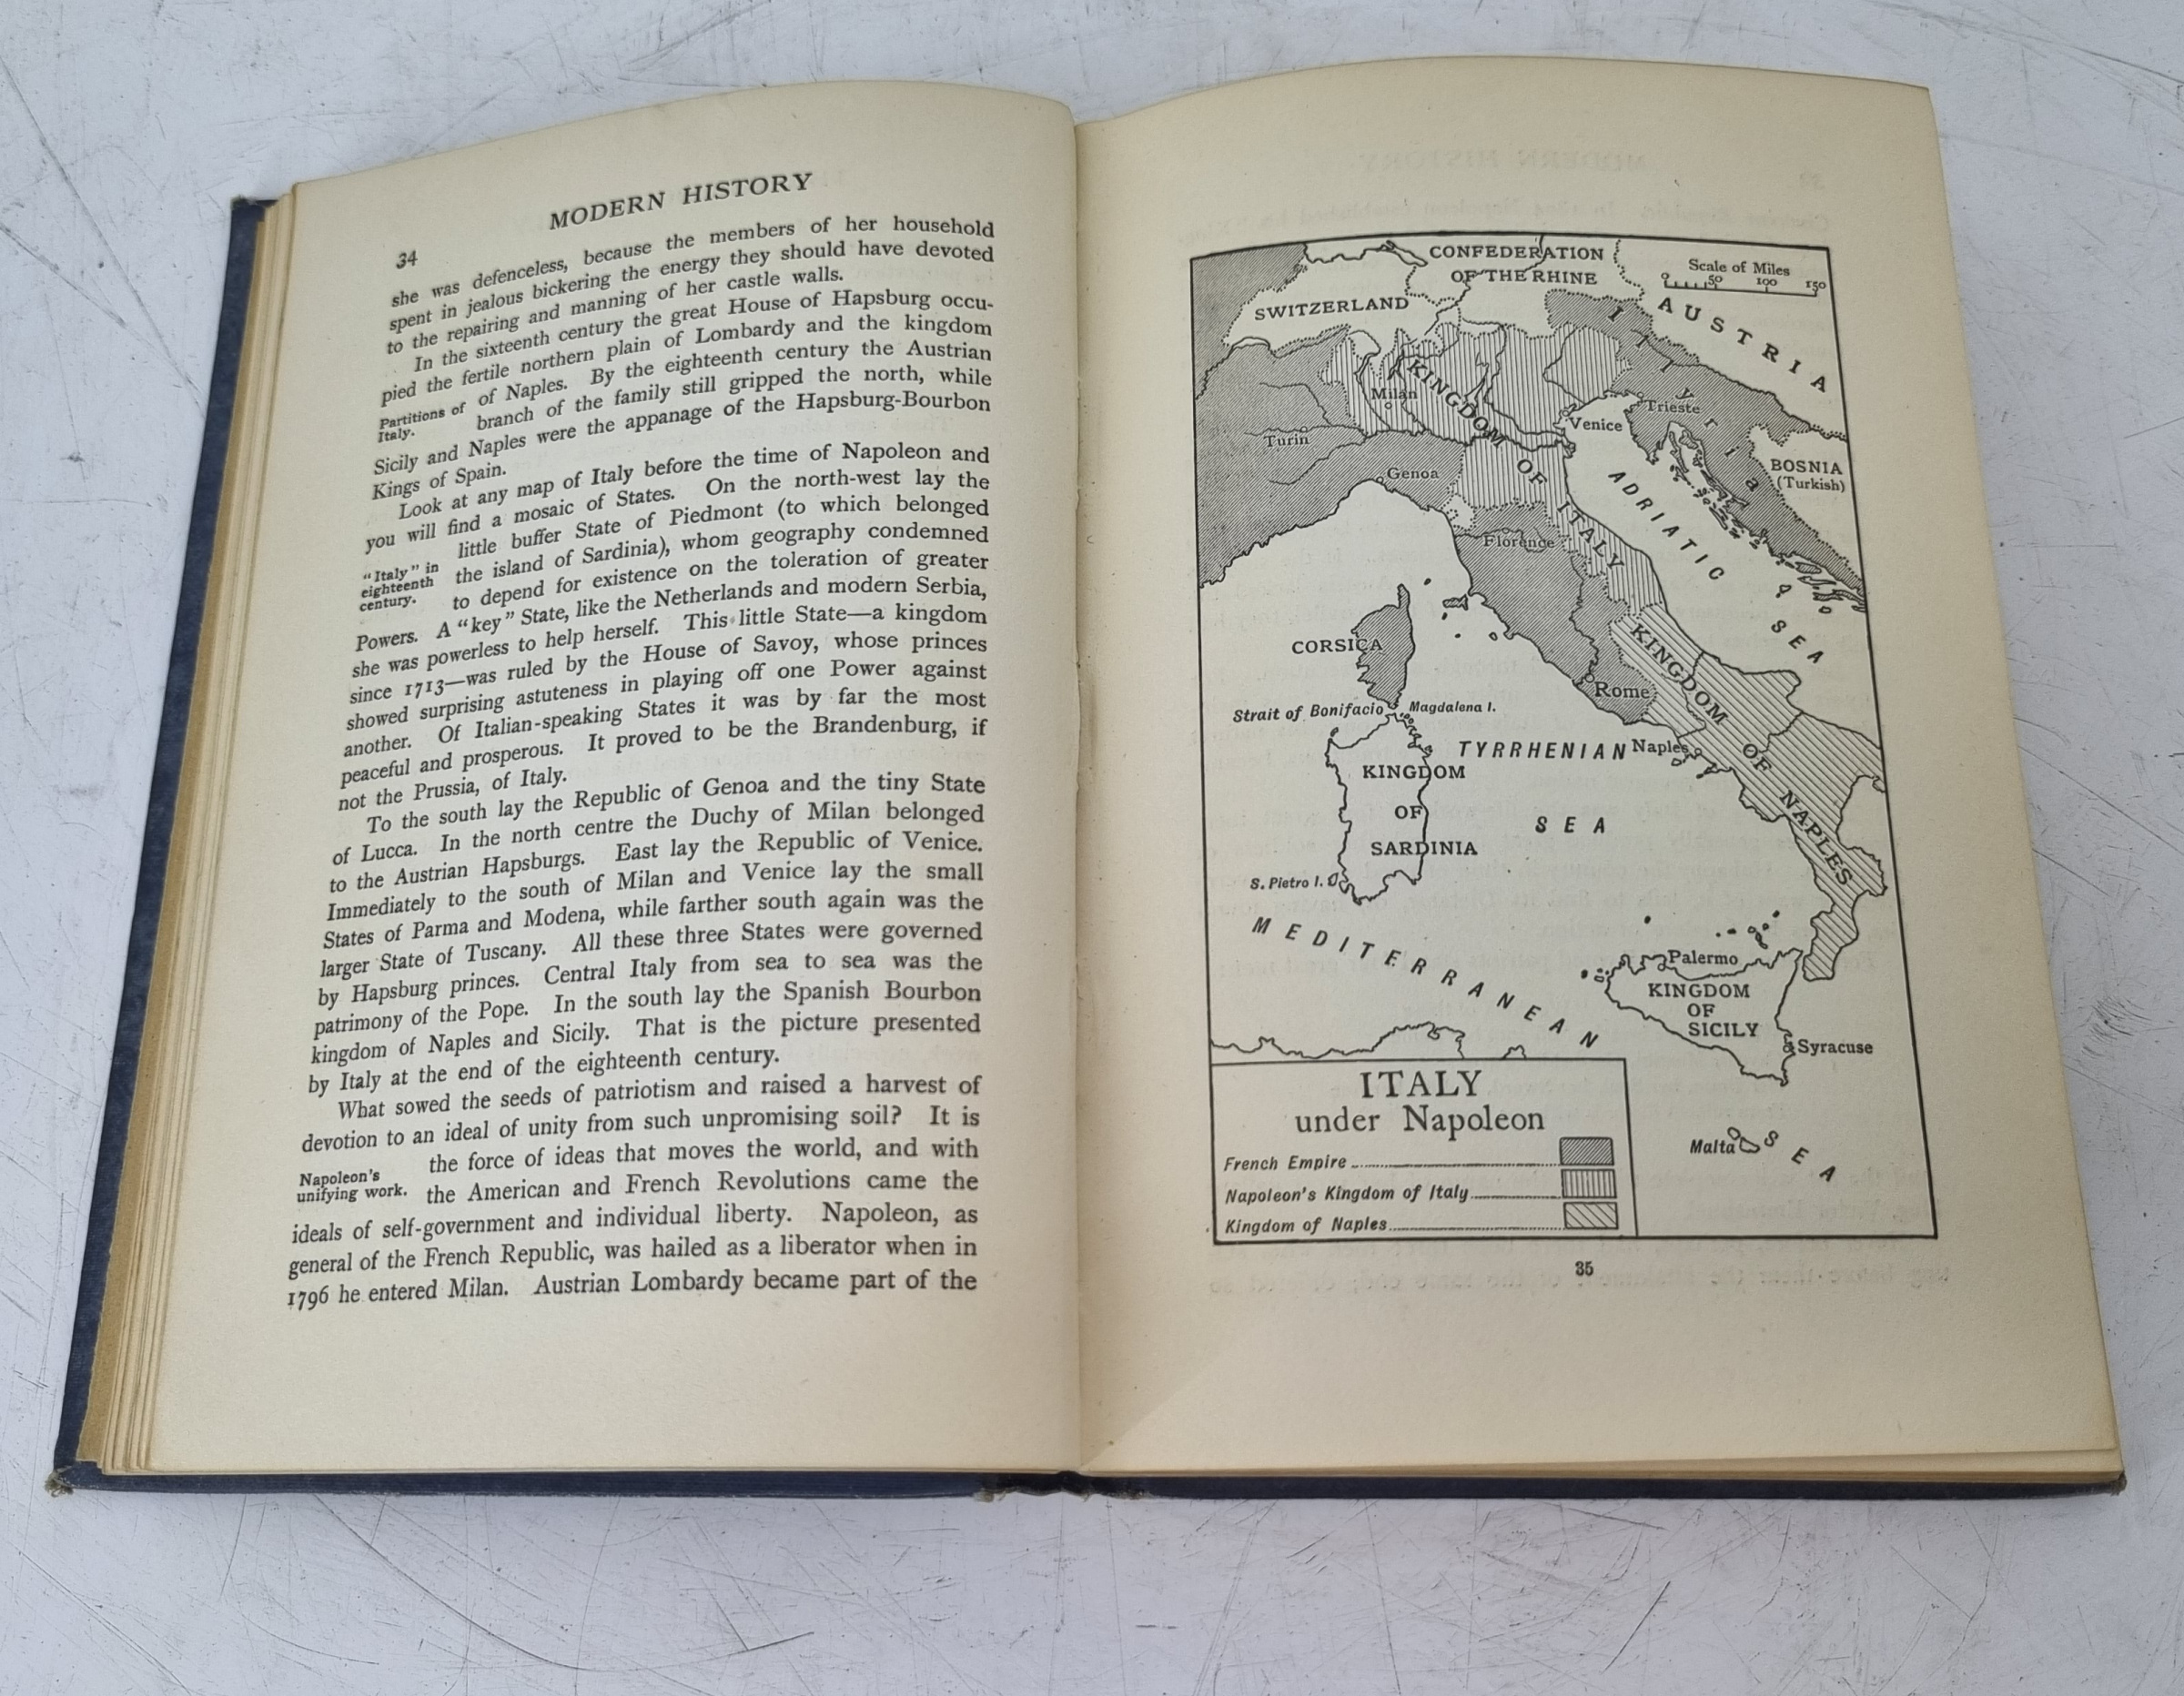 Holland & Britain by Charles Wilson, Journey Without Maps A Travel Book by Graham Greene - Published - Image 15 of 18